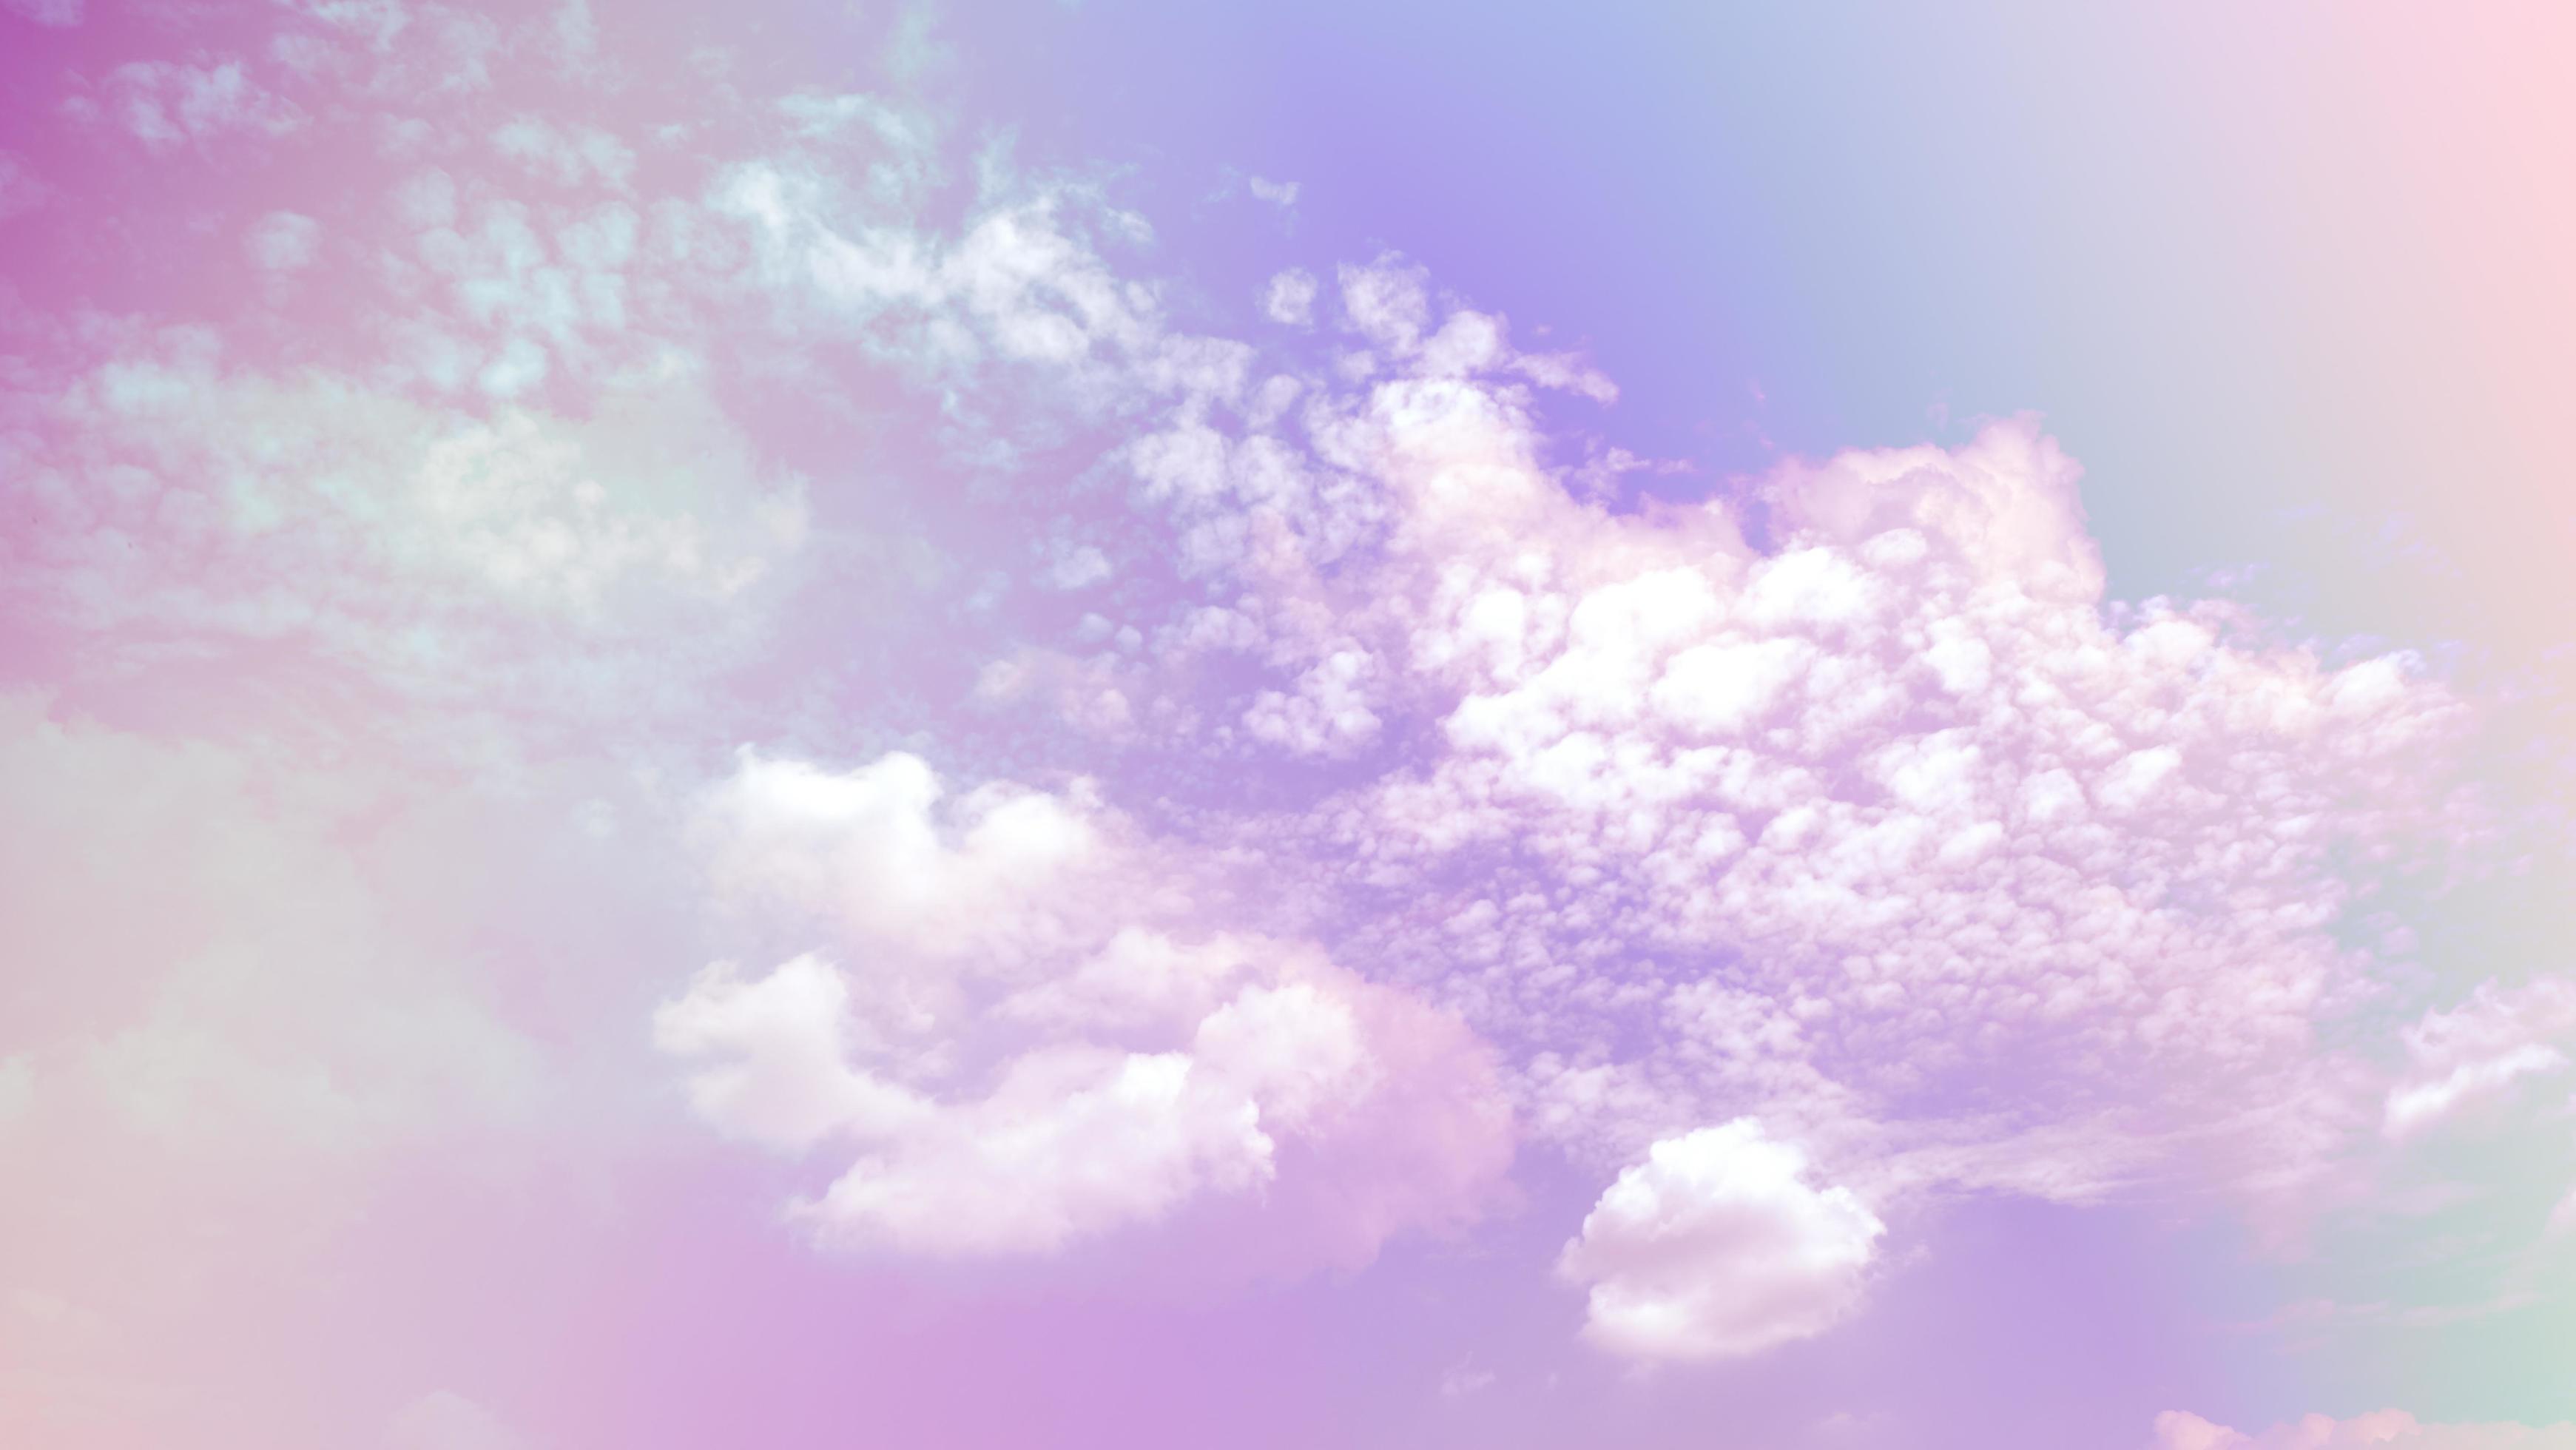 beauty sweet pastel purple colorful with fluffy clouds on sky. multi color rainbow image. abstract fantasy growing light